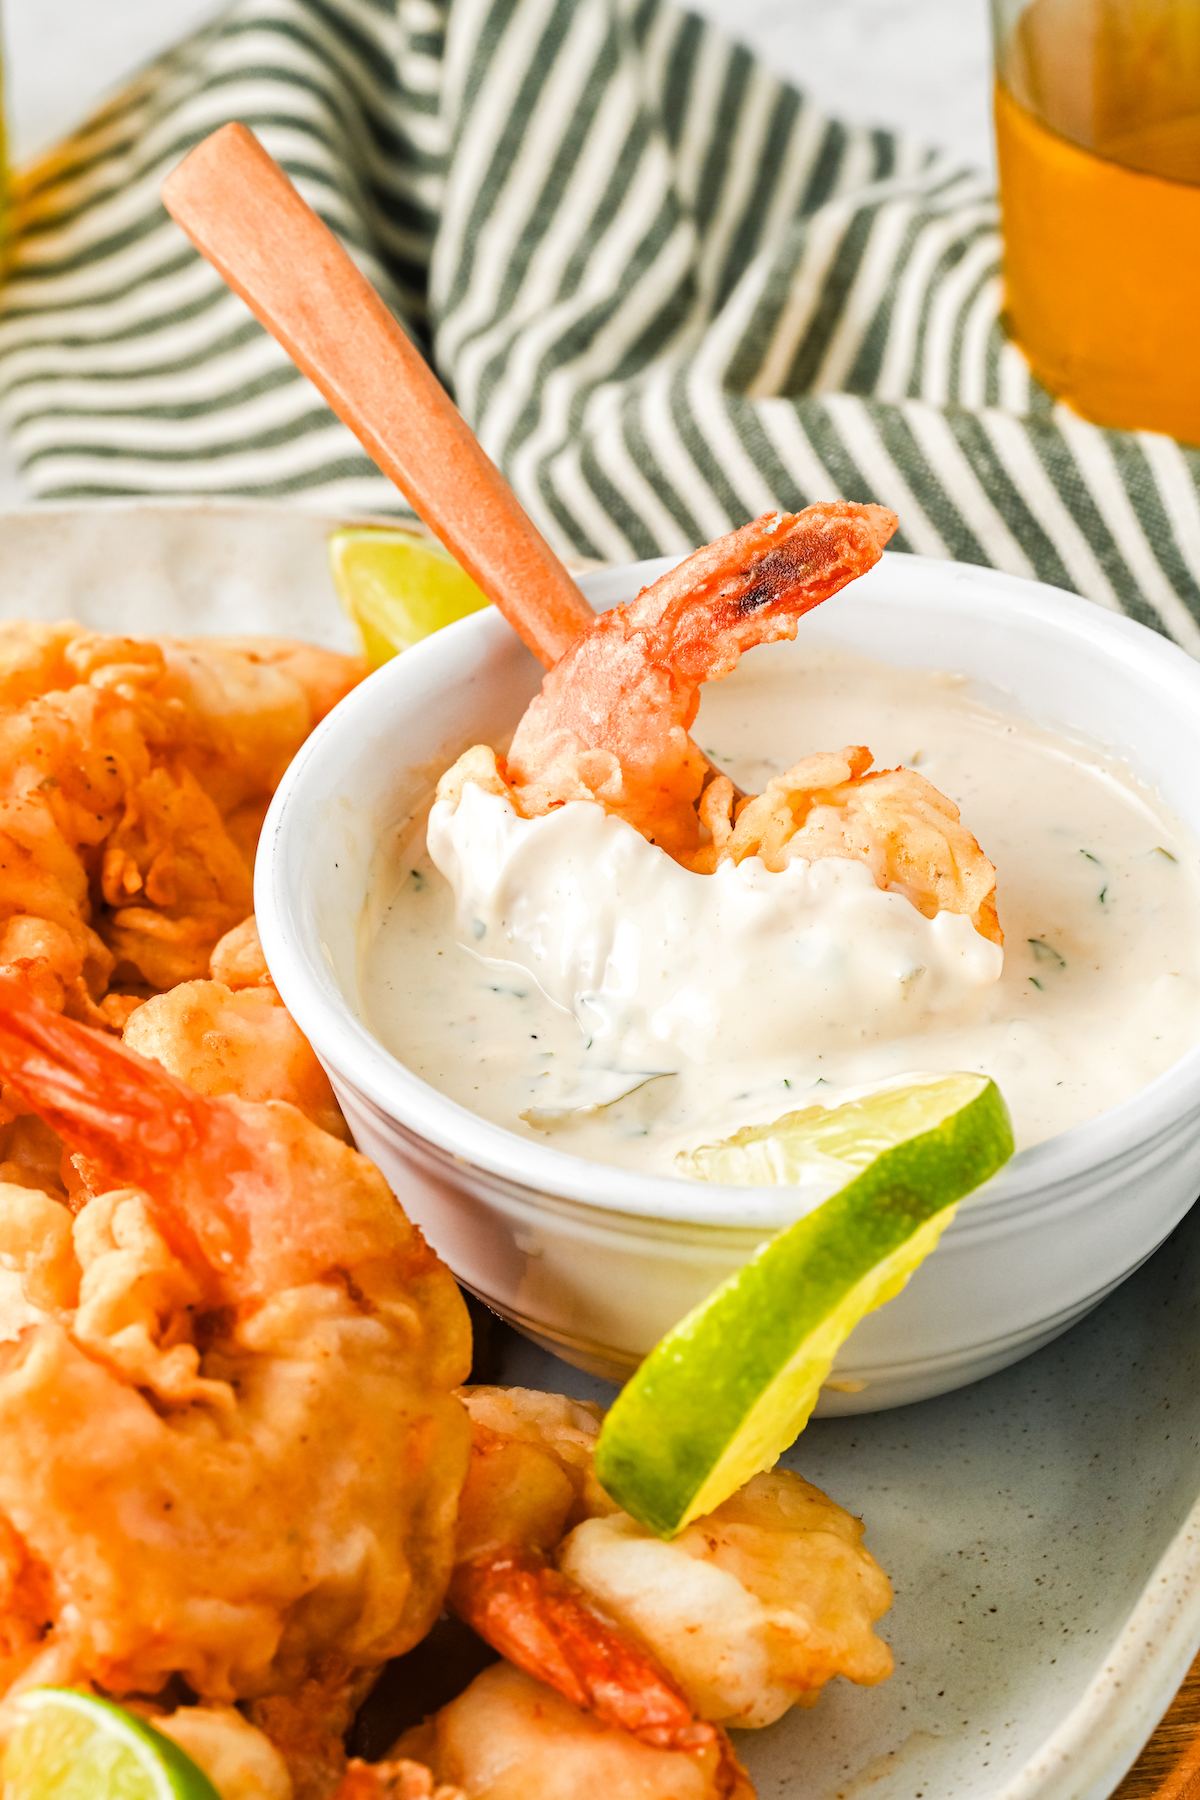 Dipping a Mexican fried shrimp in dipping sauce.